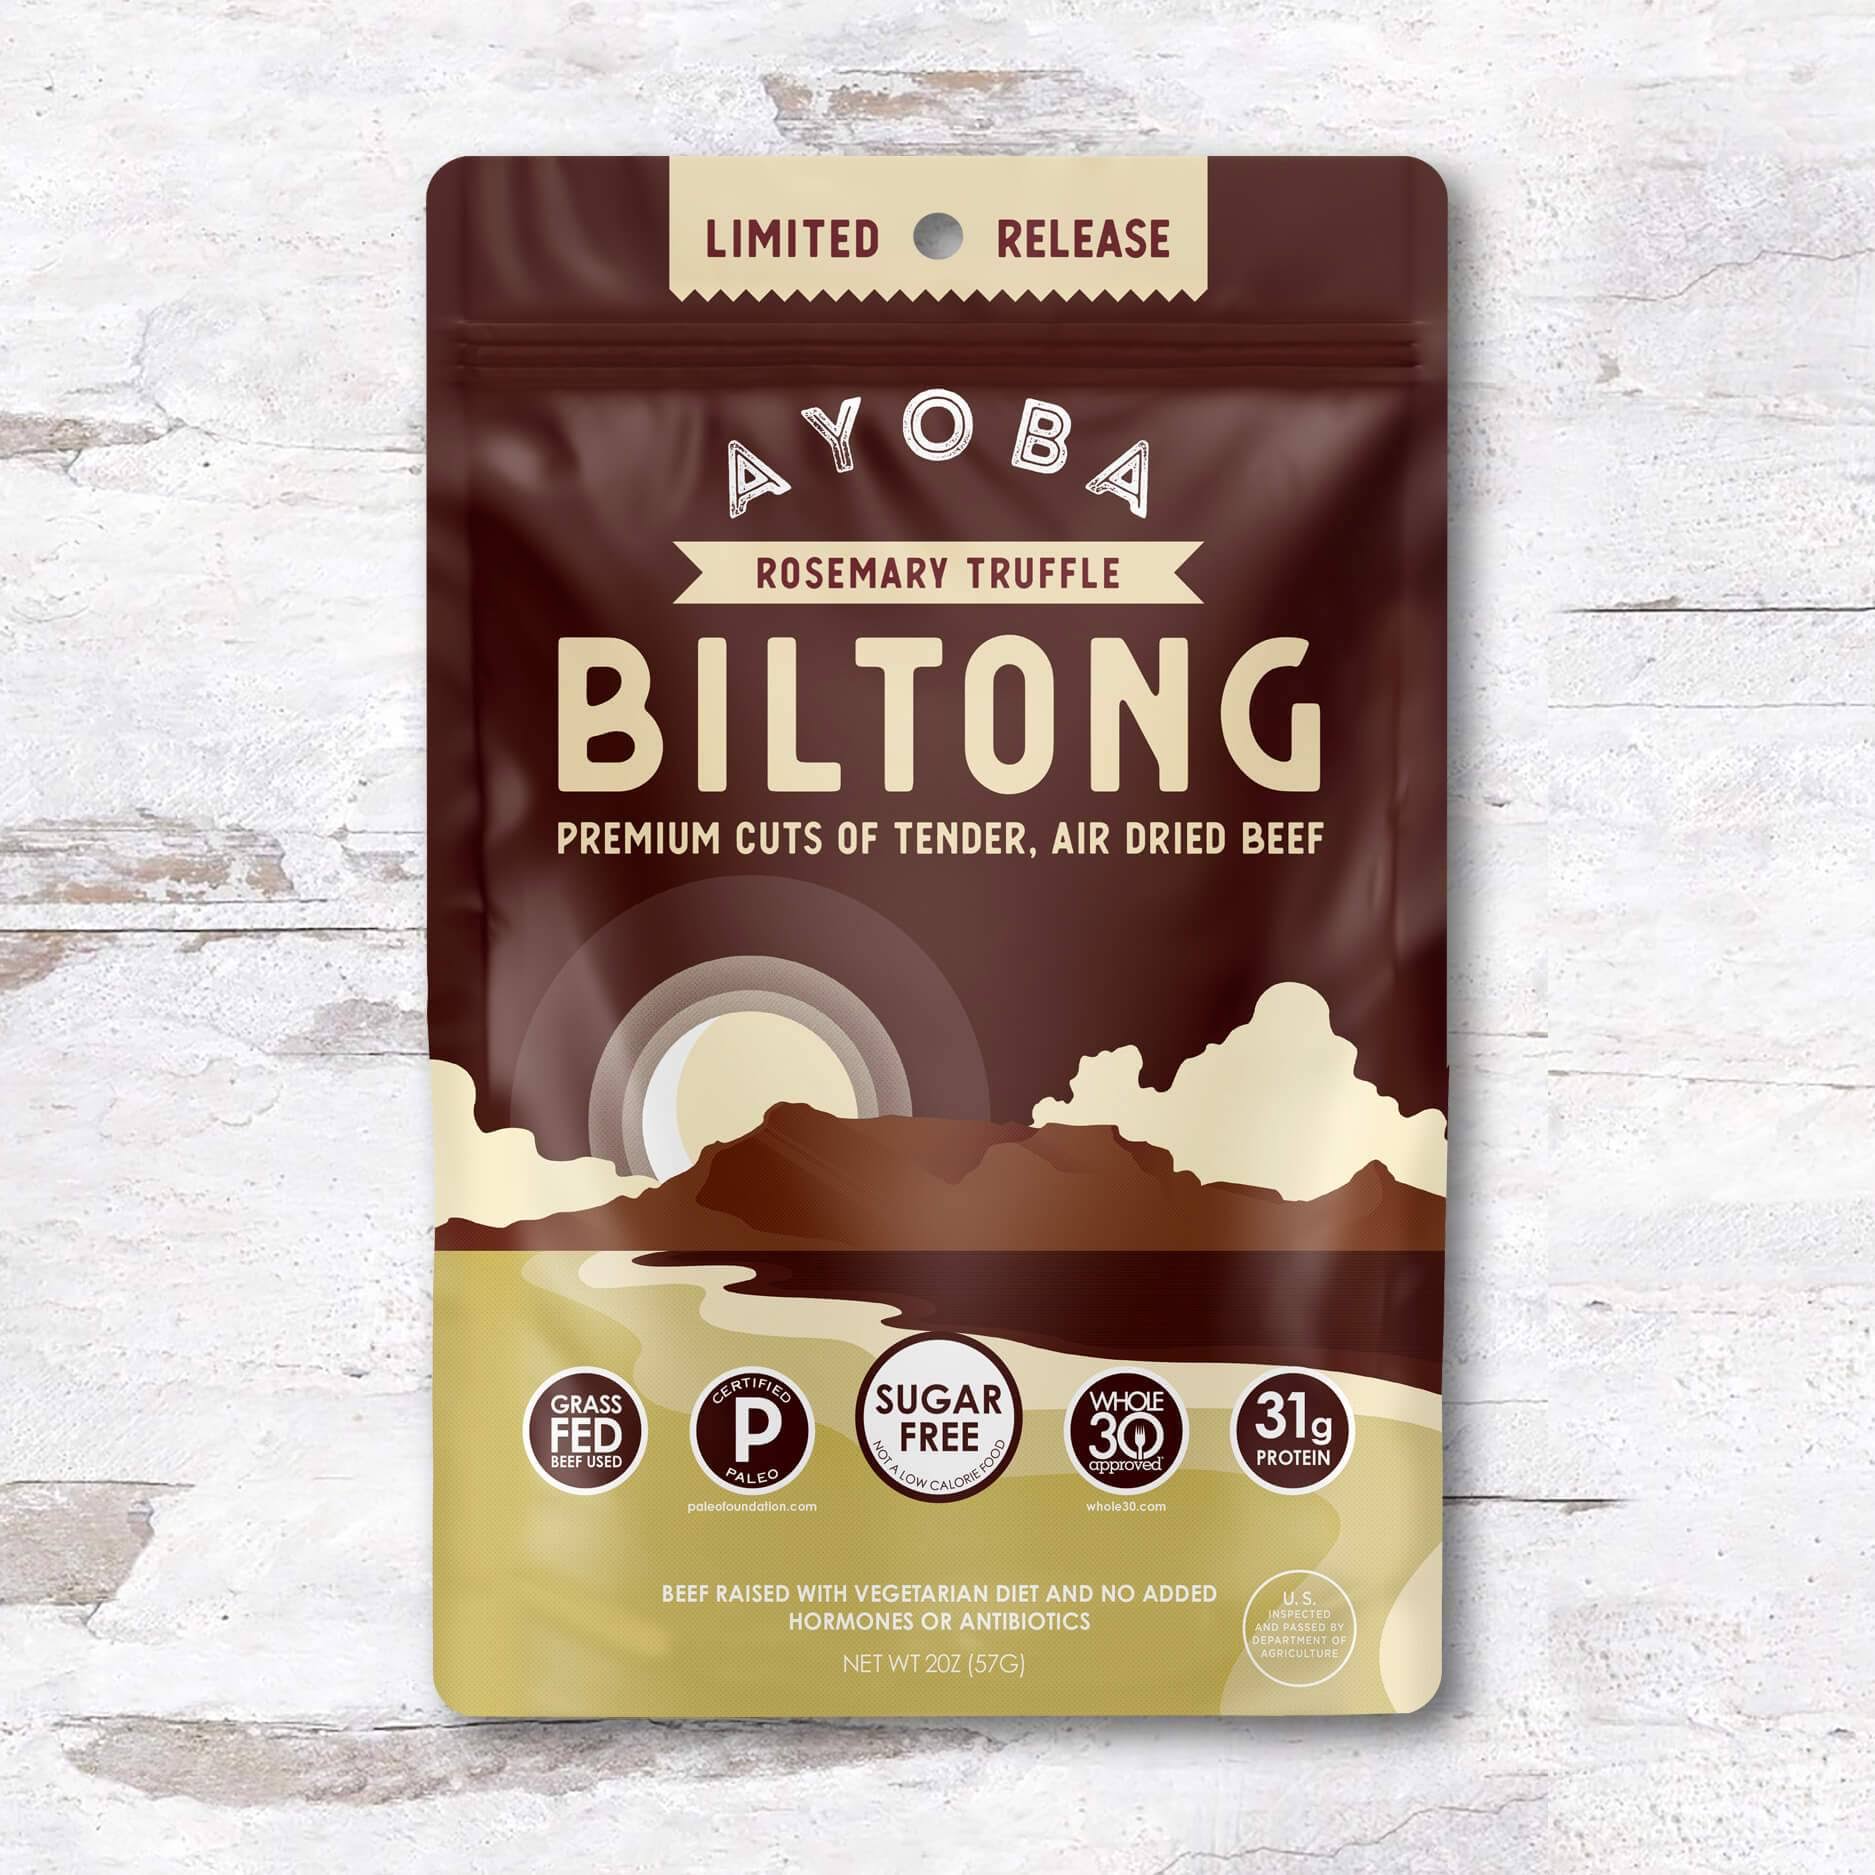 Rosemary Truffle Biltong (Limited Release) Grass Fed 2 oz